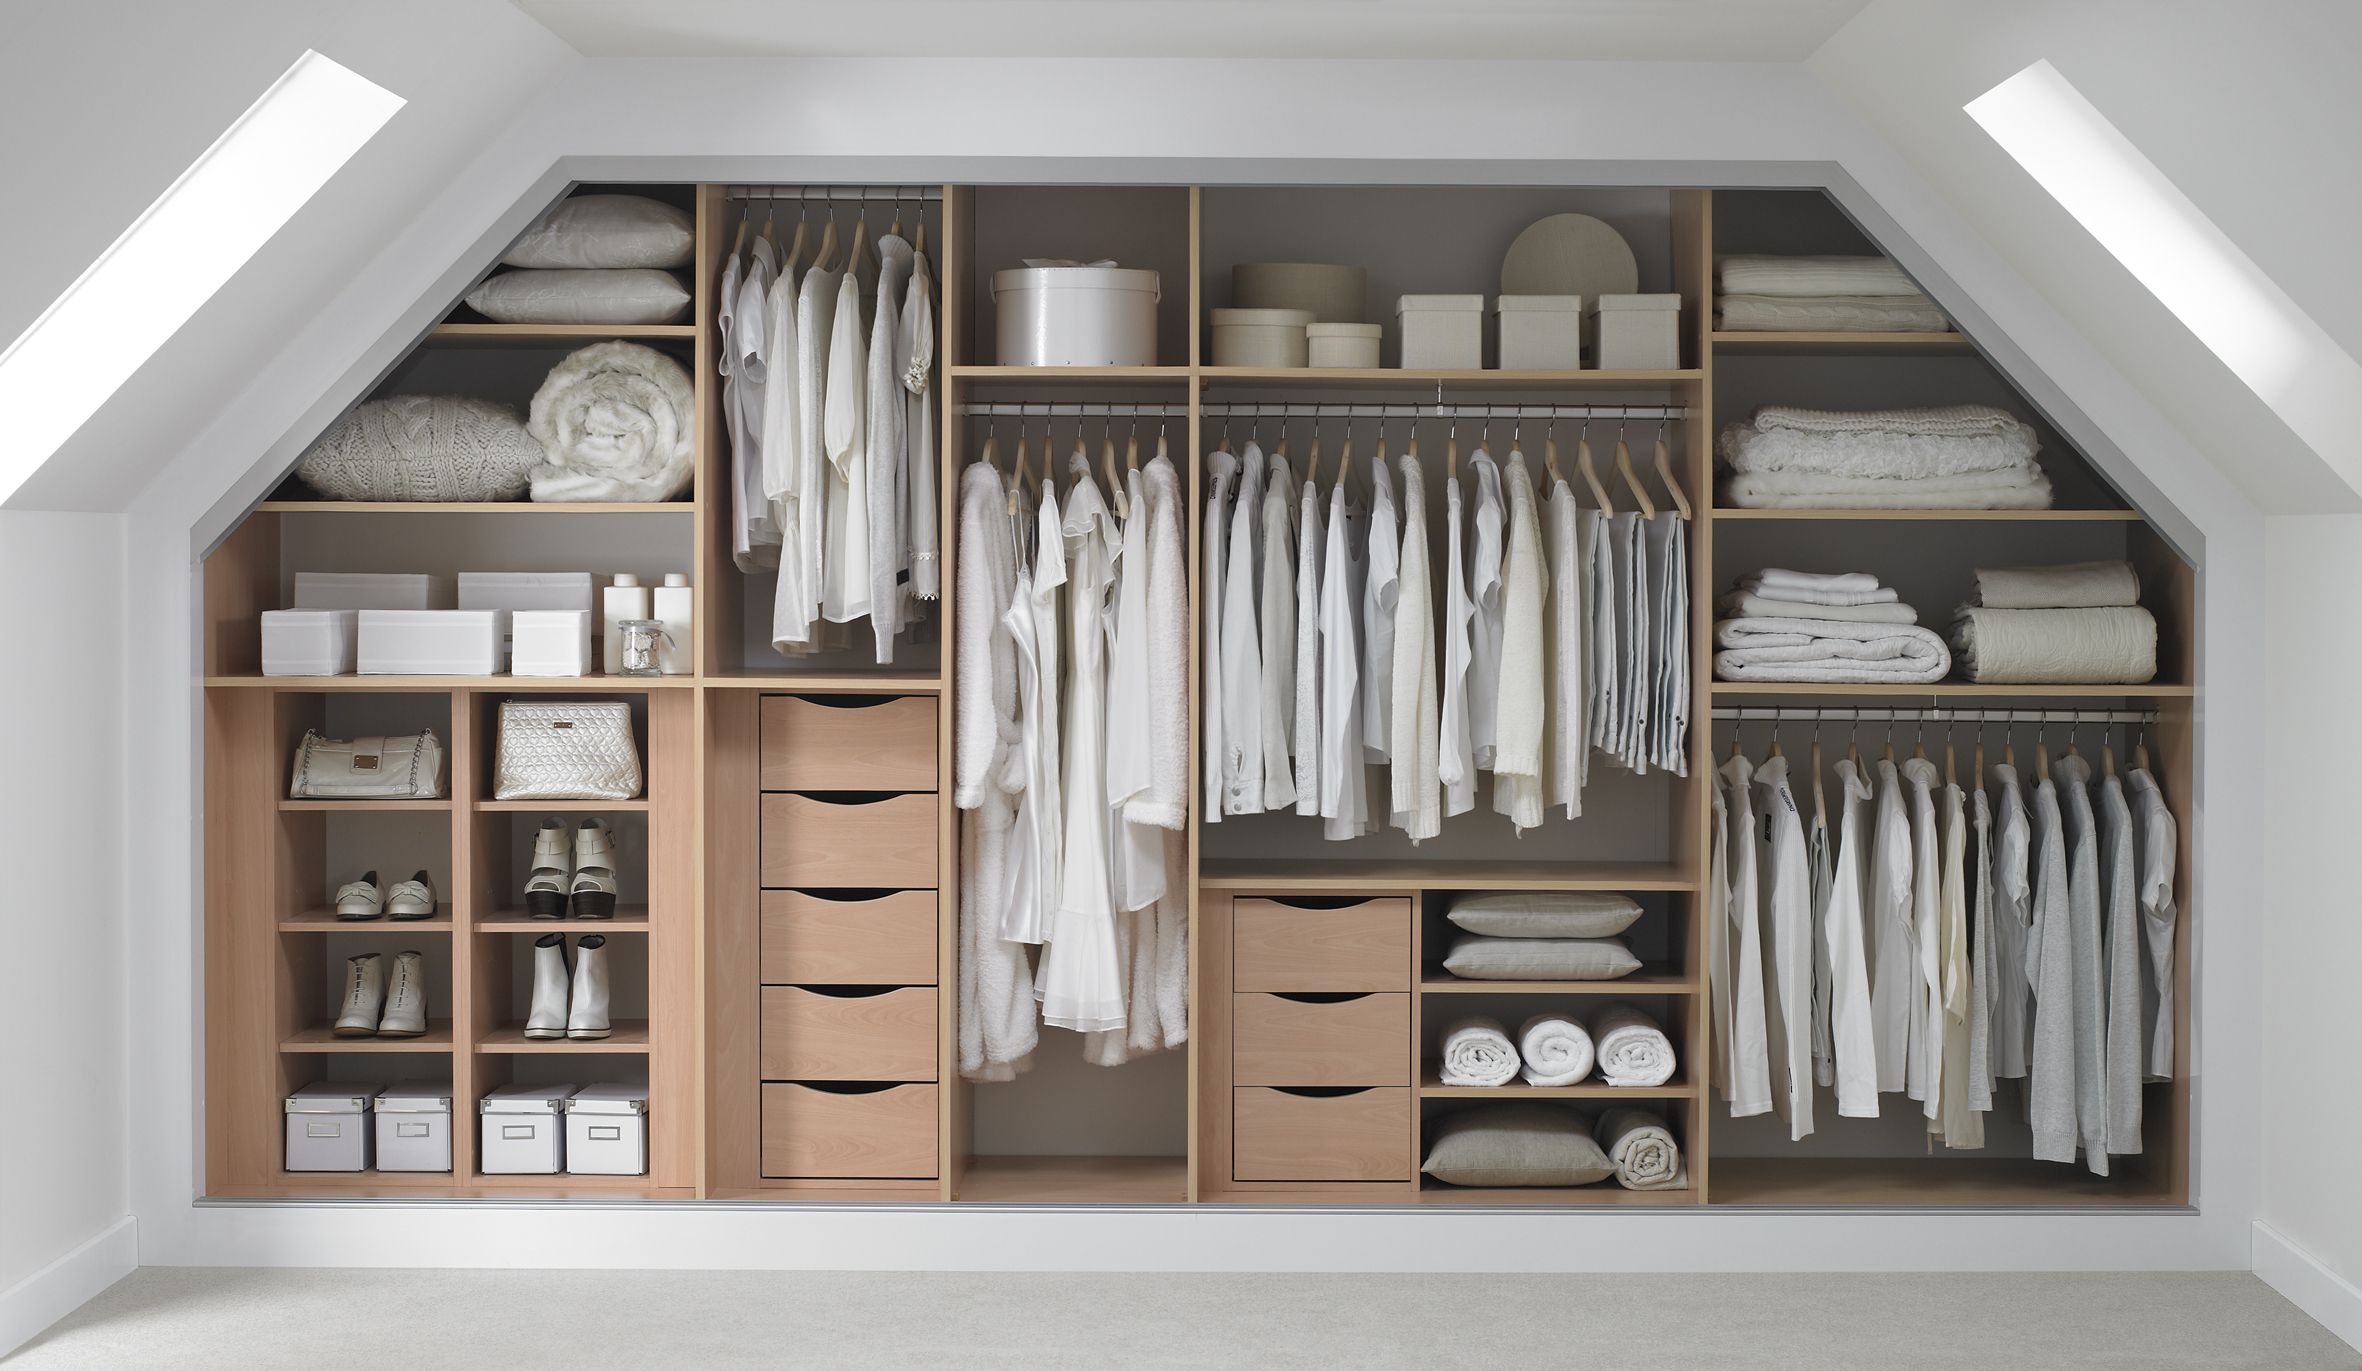 Different types of fitted wardrobe interiors - Fitted bedroom wardrobe ideas